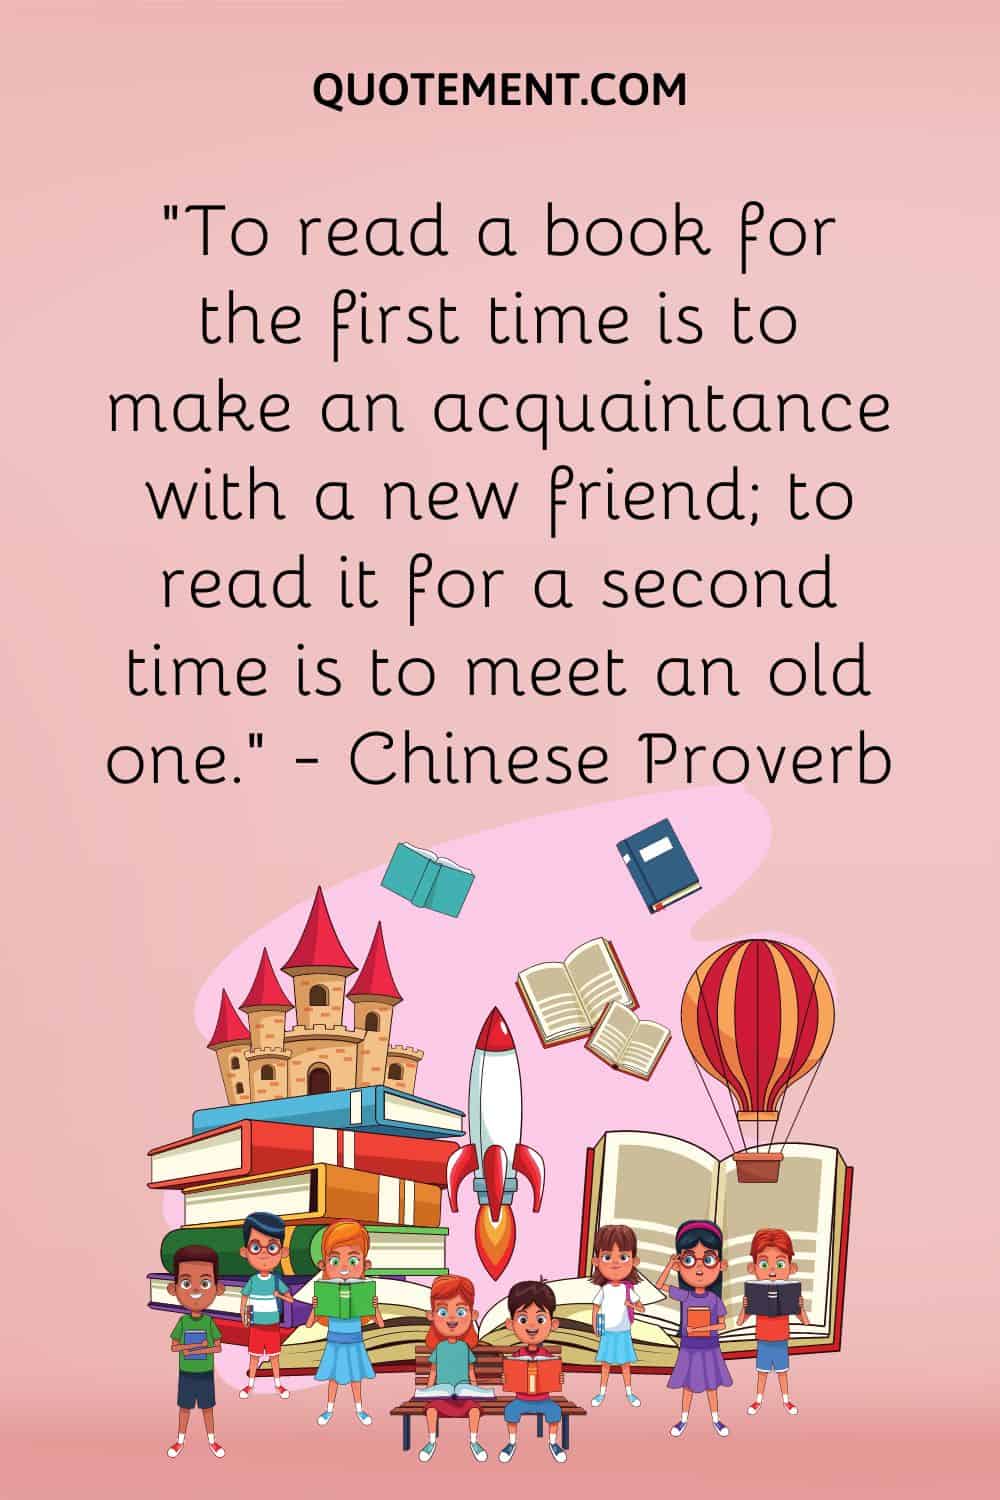 “To read a book for the first time is to make an acquaintance with a new friend; to read it for a second time is to meet an old one.” — Chinese Proverb